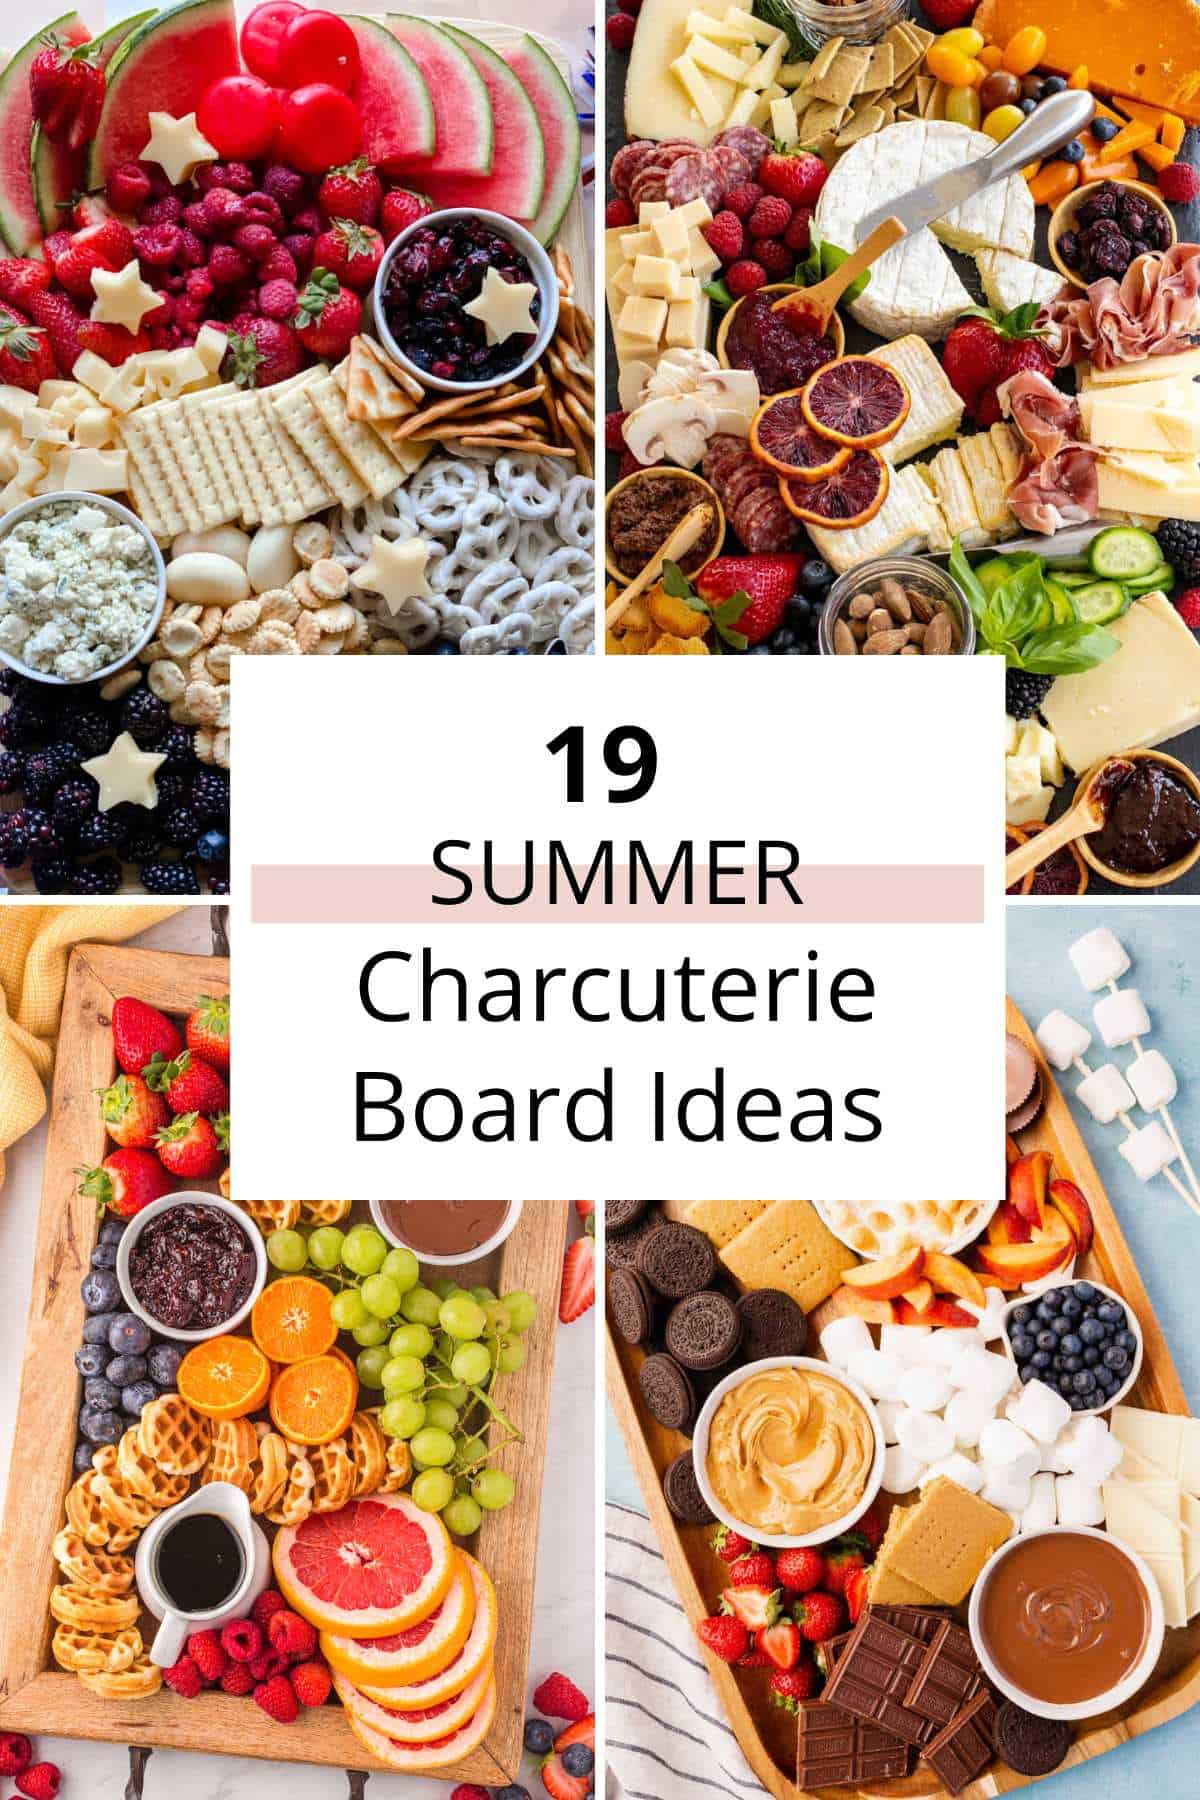 An assortment of summer charcuterie boards featuring an array of fruits, cheeses, and deli meats to offer easy charcuterie ideas for any occasion.